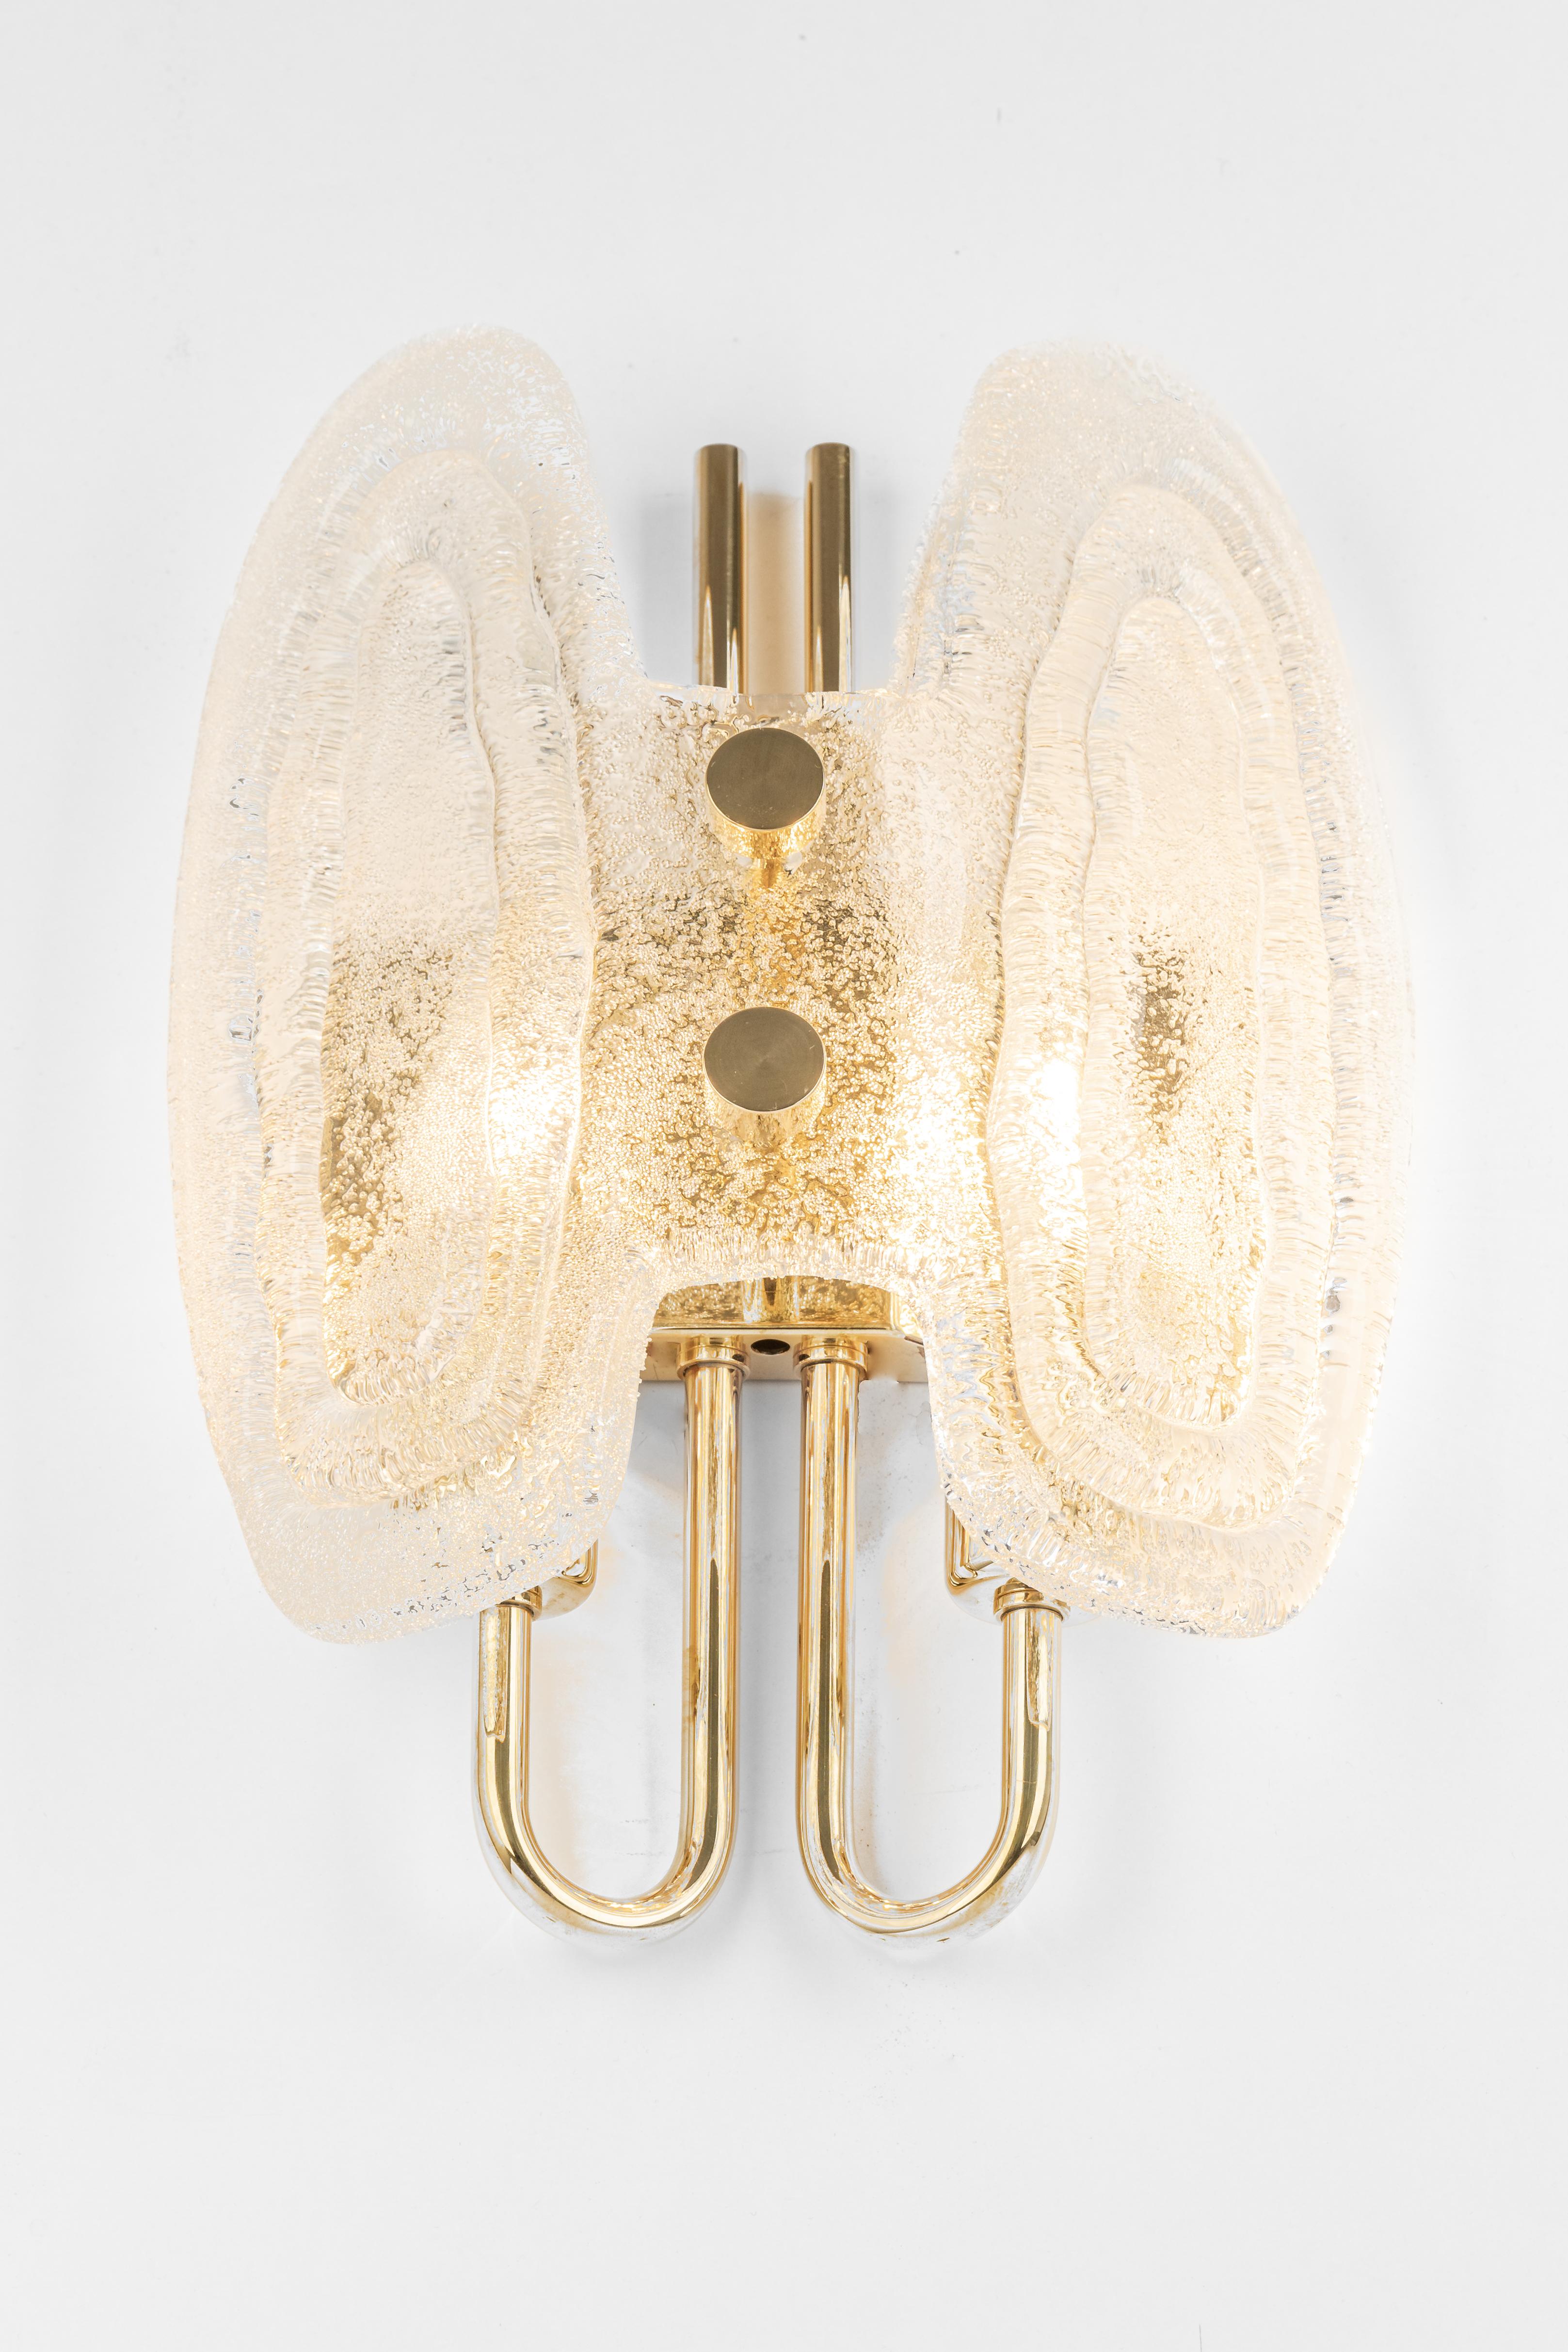 Pair of Murano Ice Glass Brass Sconces by Hillebrand, Germany, 1970s For Sale 1